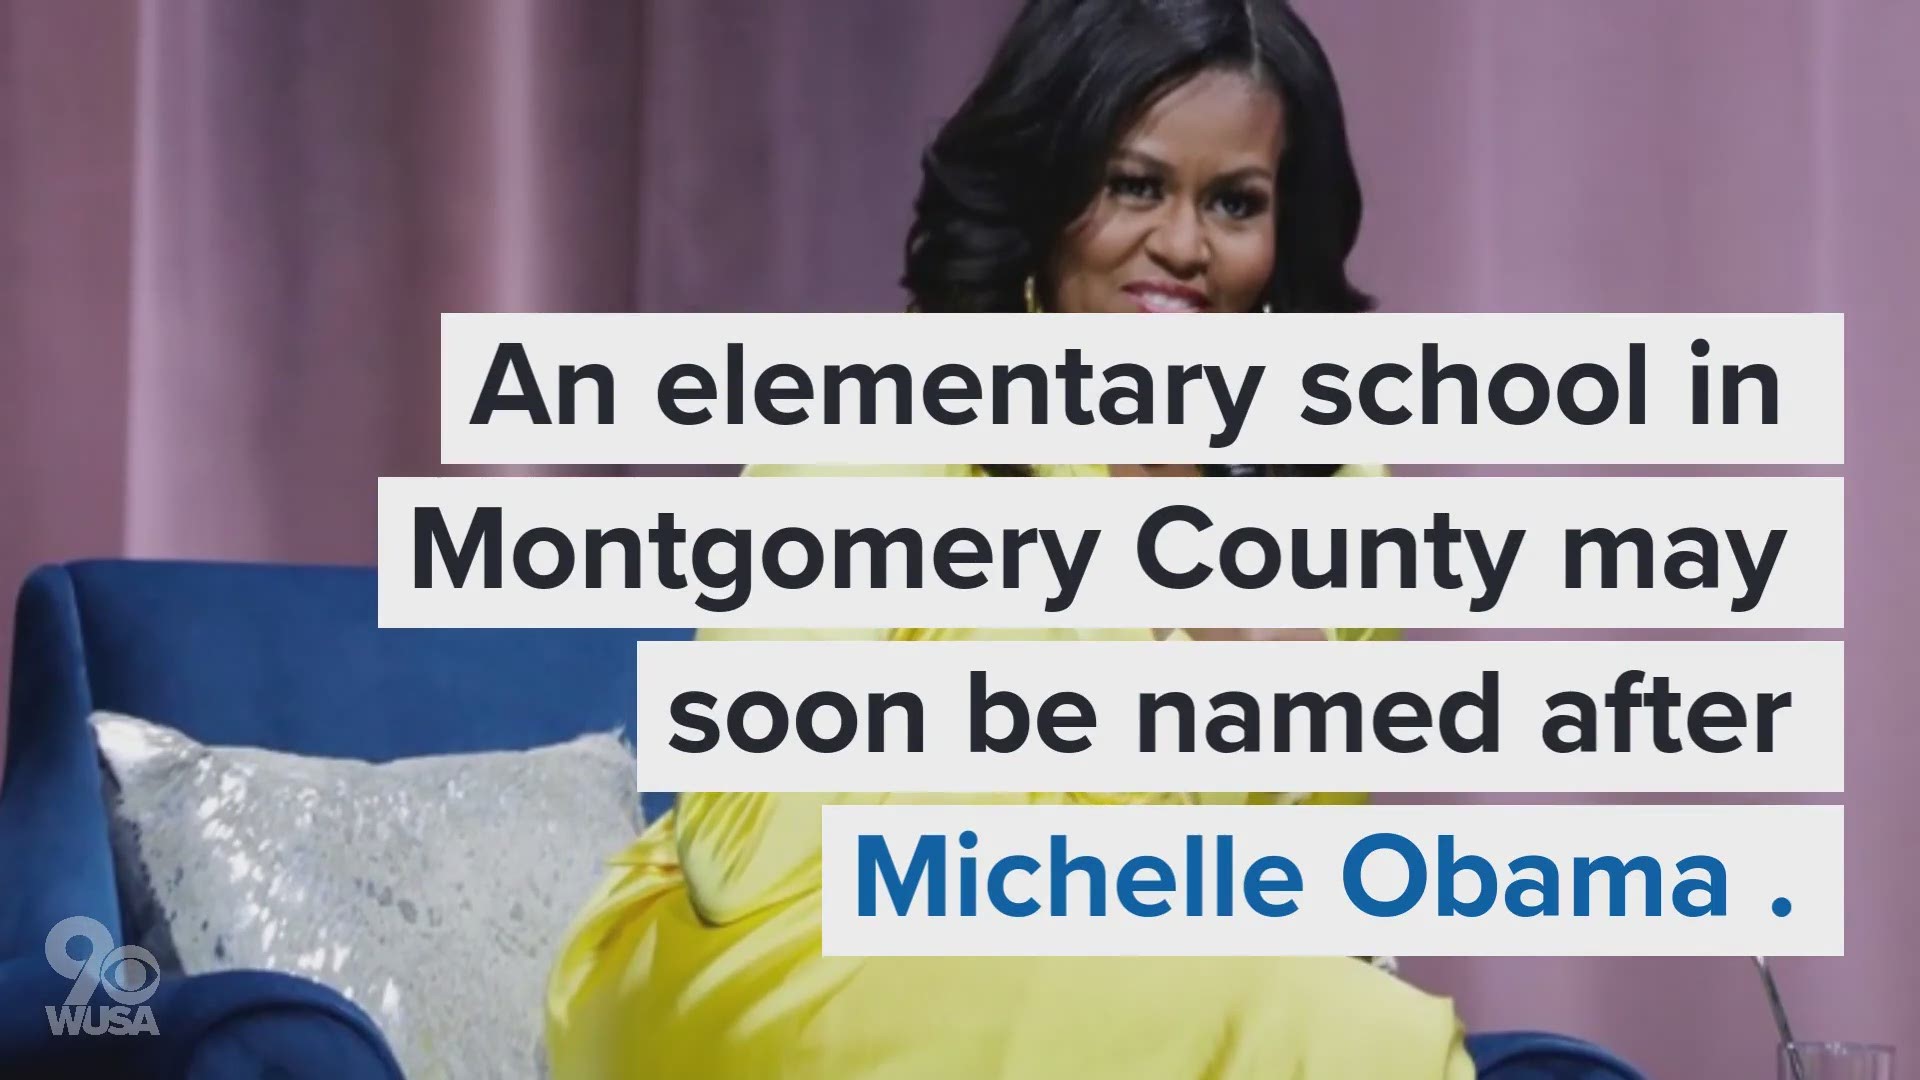 A new elementary school in Montgomery County could be named after former First Lady Michelle Obama.